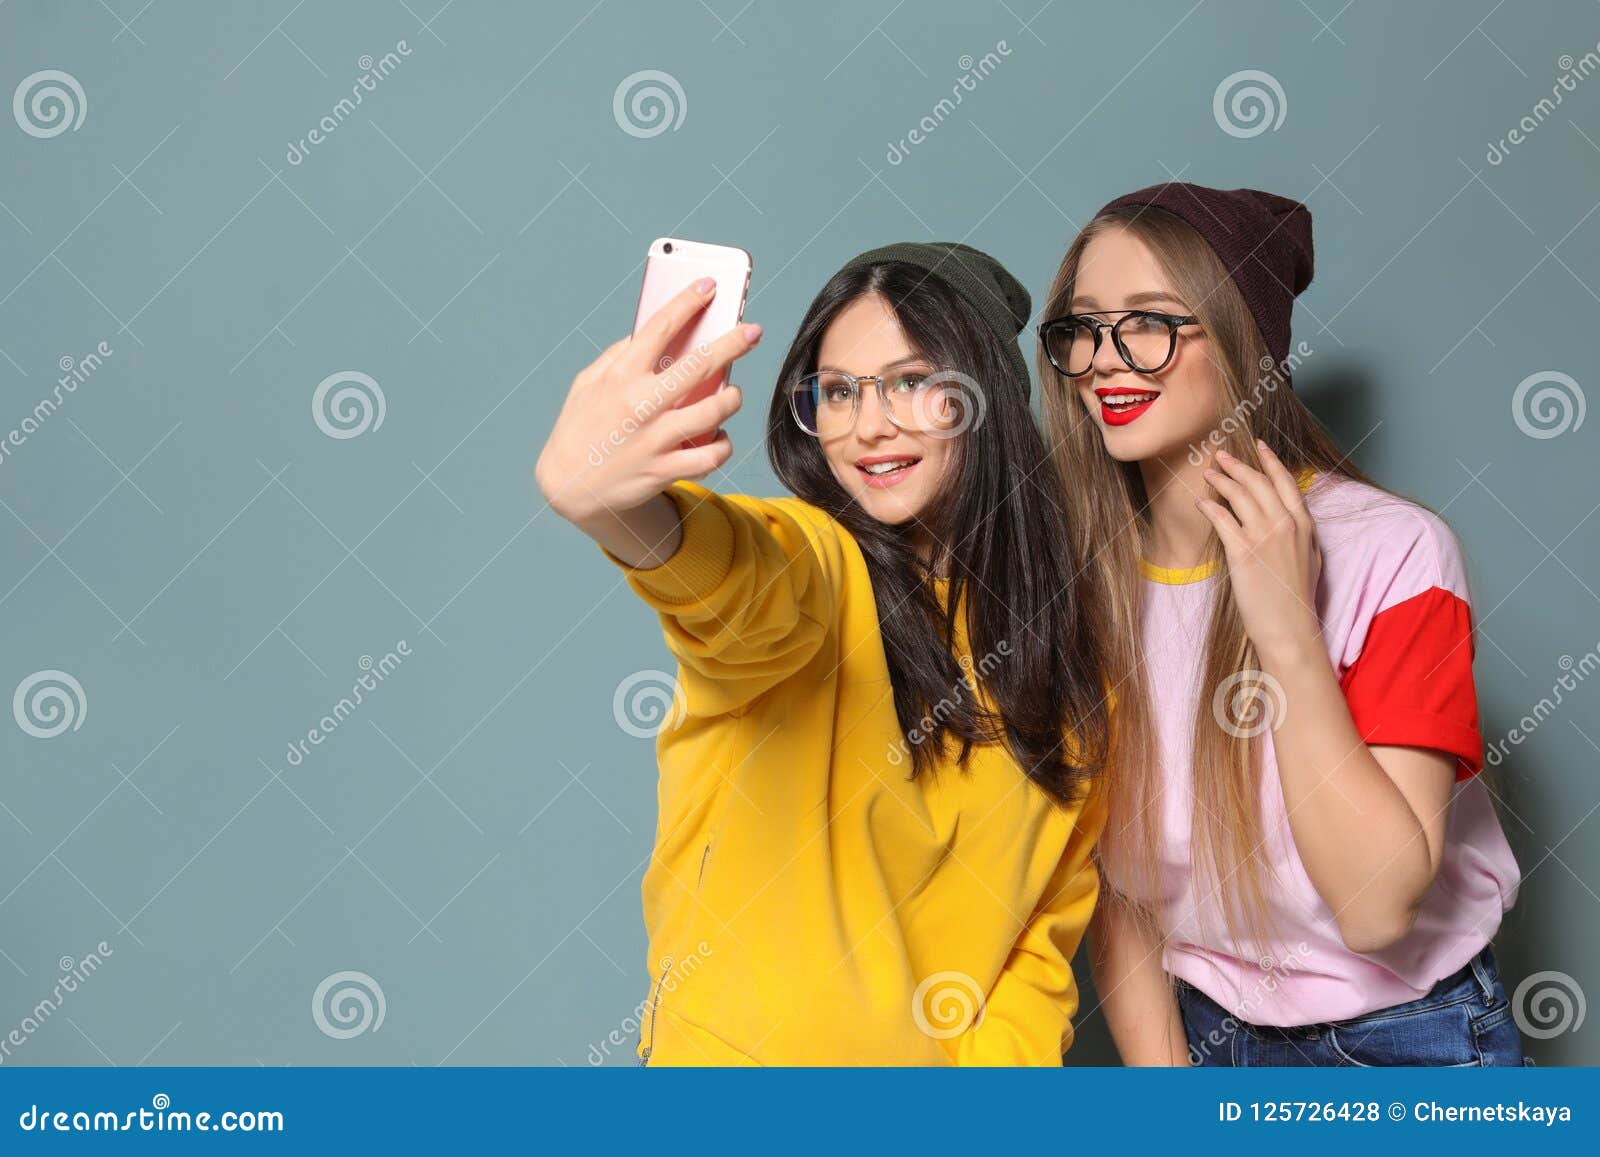 Attractive Young Women Taking Selfie Stock Photo - Image of modern ...